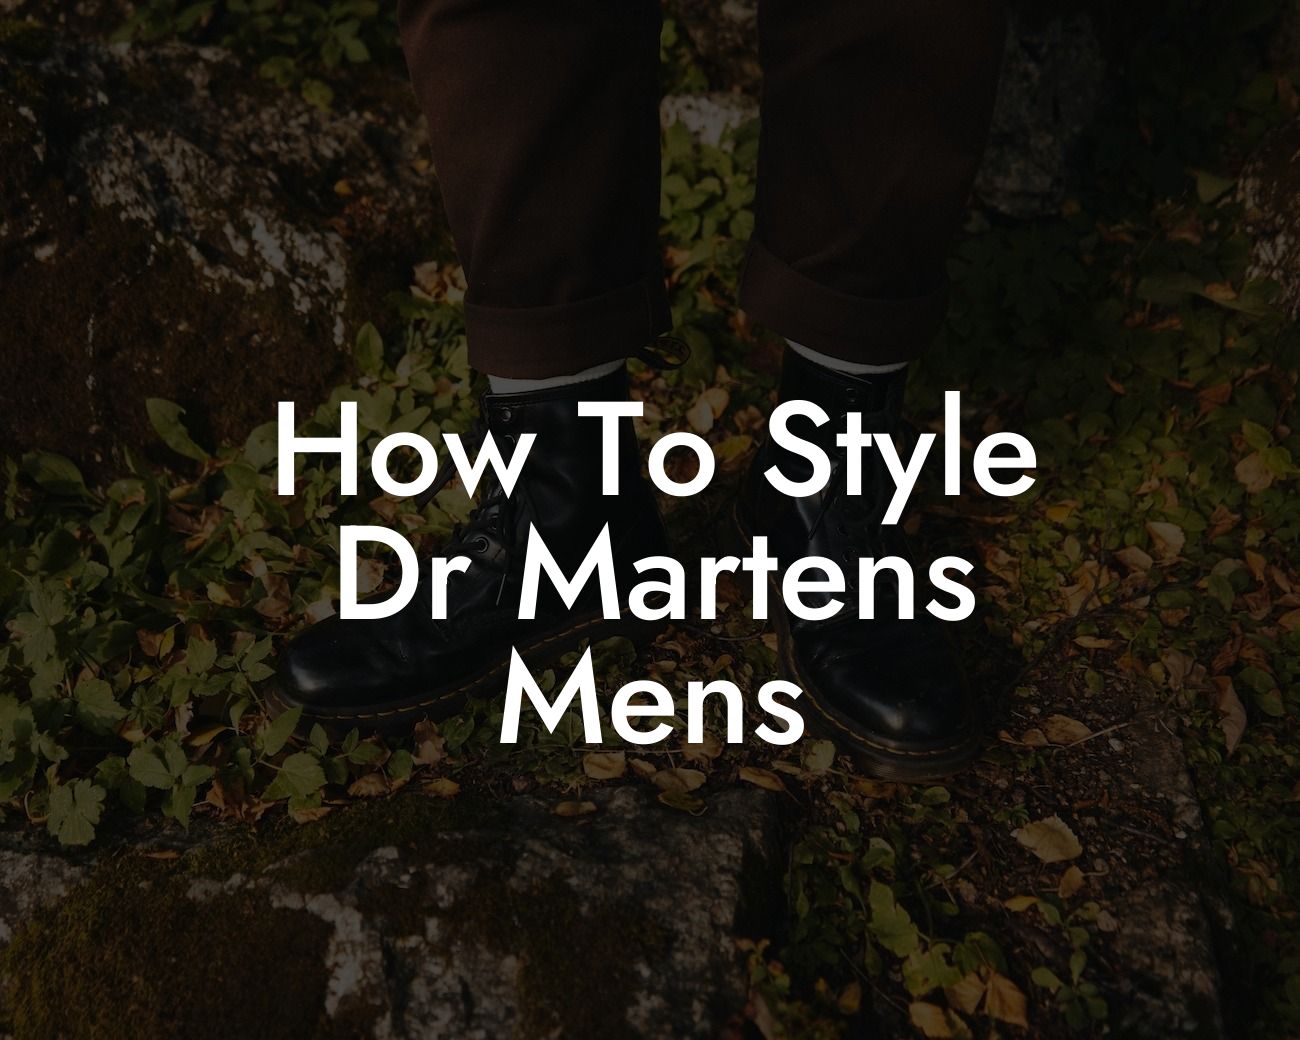 How To Style Dr Martens Mens